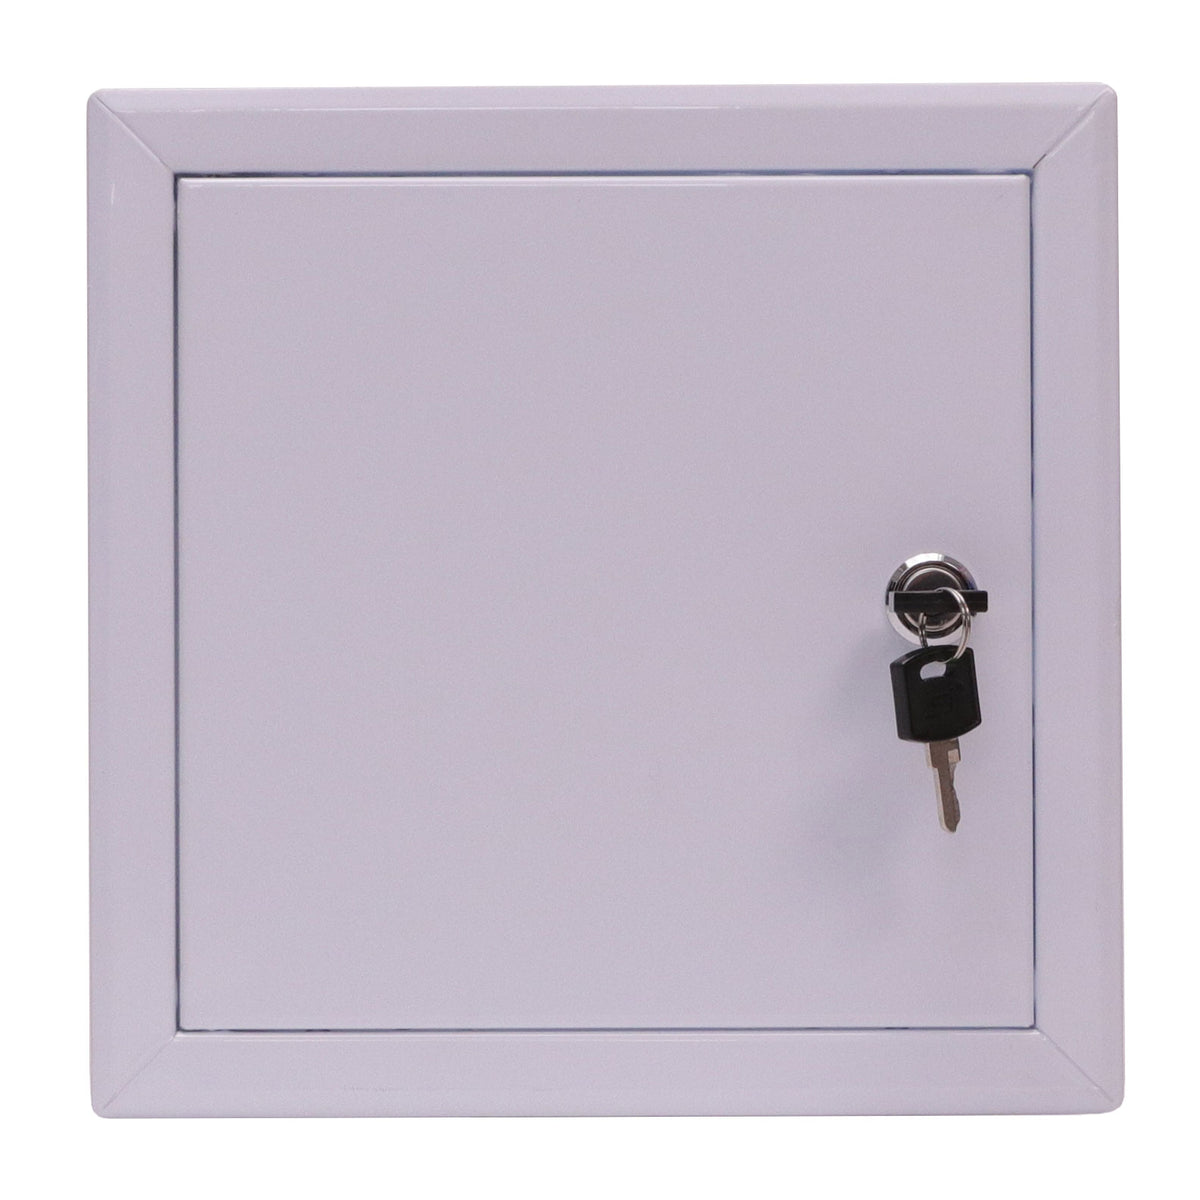 8&quot; X 8&quot; Steel Access Panel Removable Door For Wall / Ceiling Application (Lock and Key) With Frame - [Outer Dimensions: 9&quot; Width X 9&quot; Height]